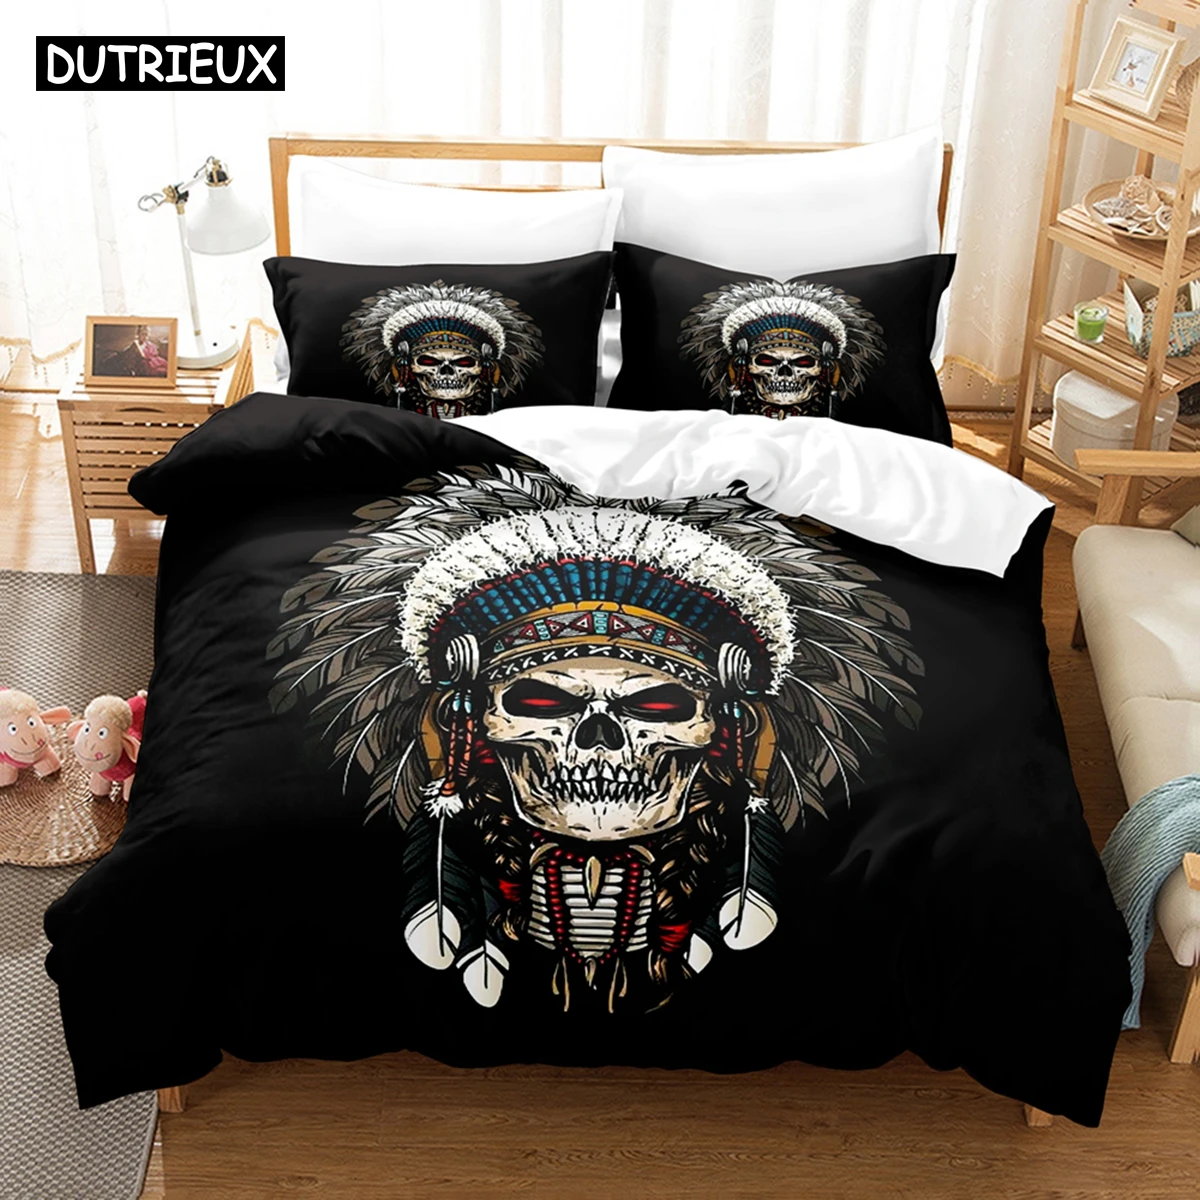 

3D The Skeleton Bedding Sets Duvet Cover Set With Pillowcase Twin Full Queen King Bedclothes Bed Linen